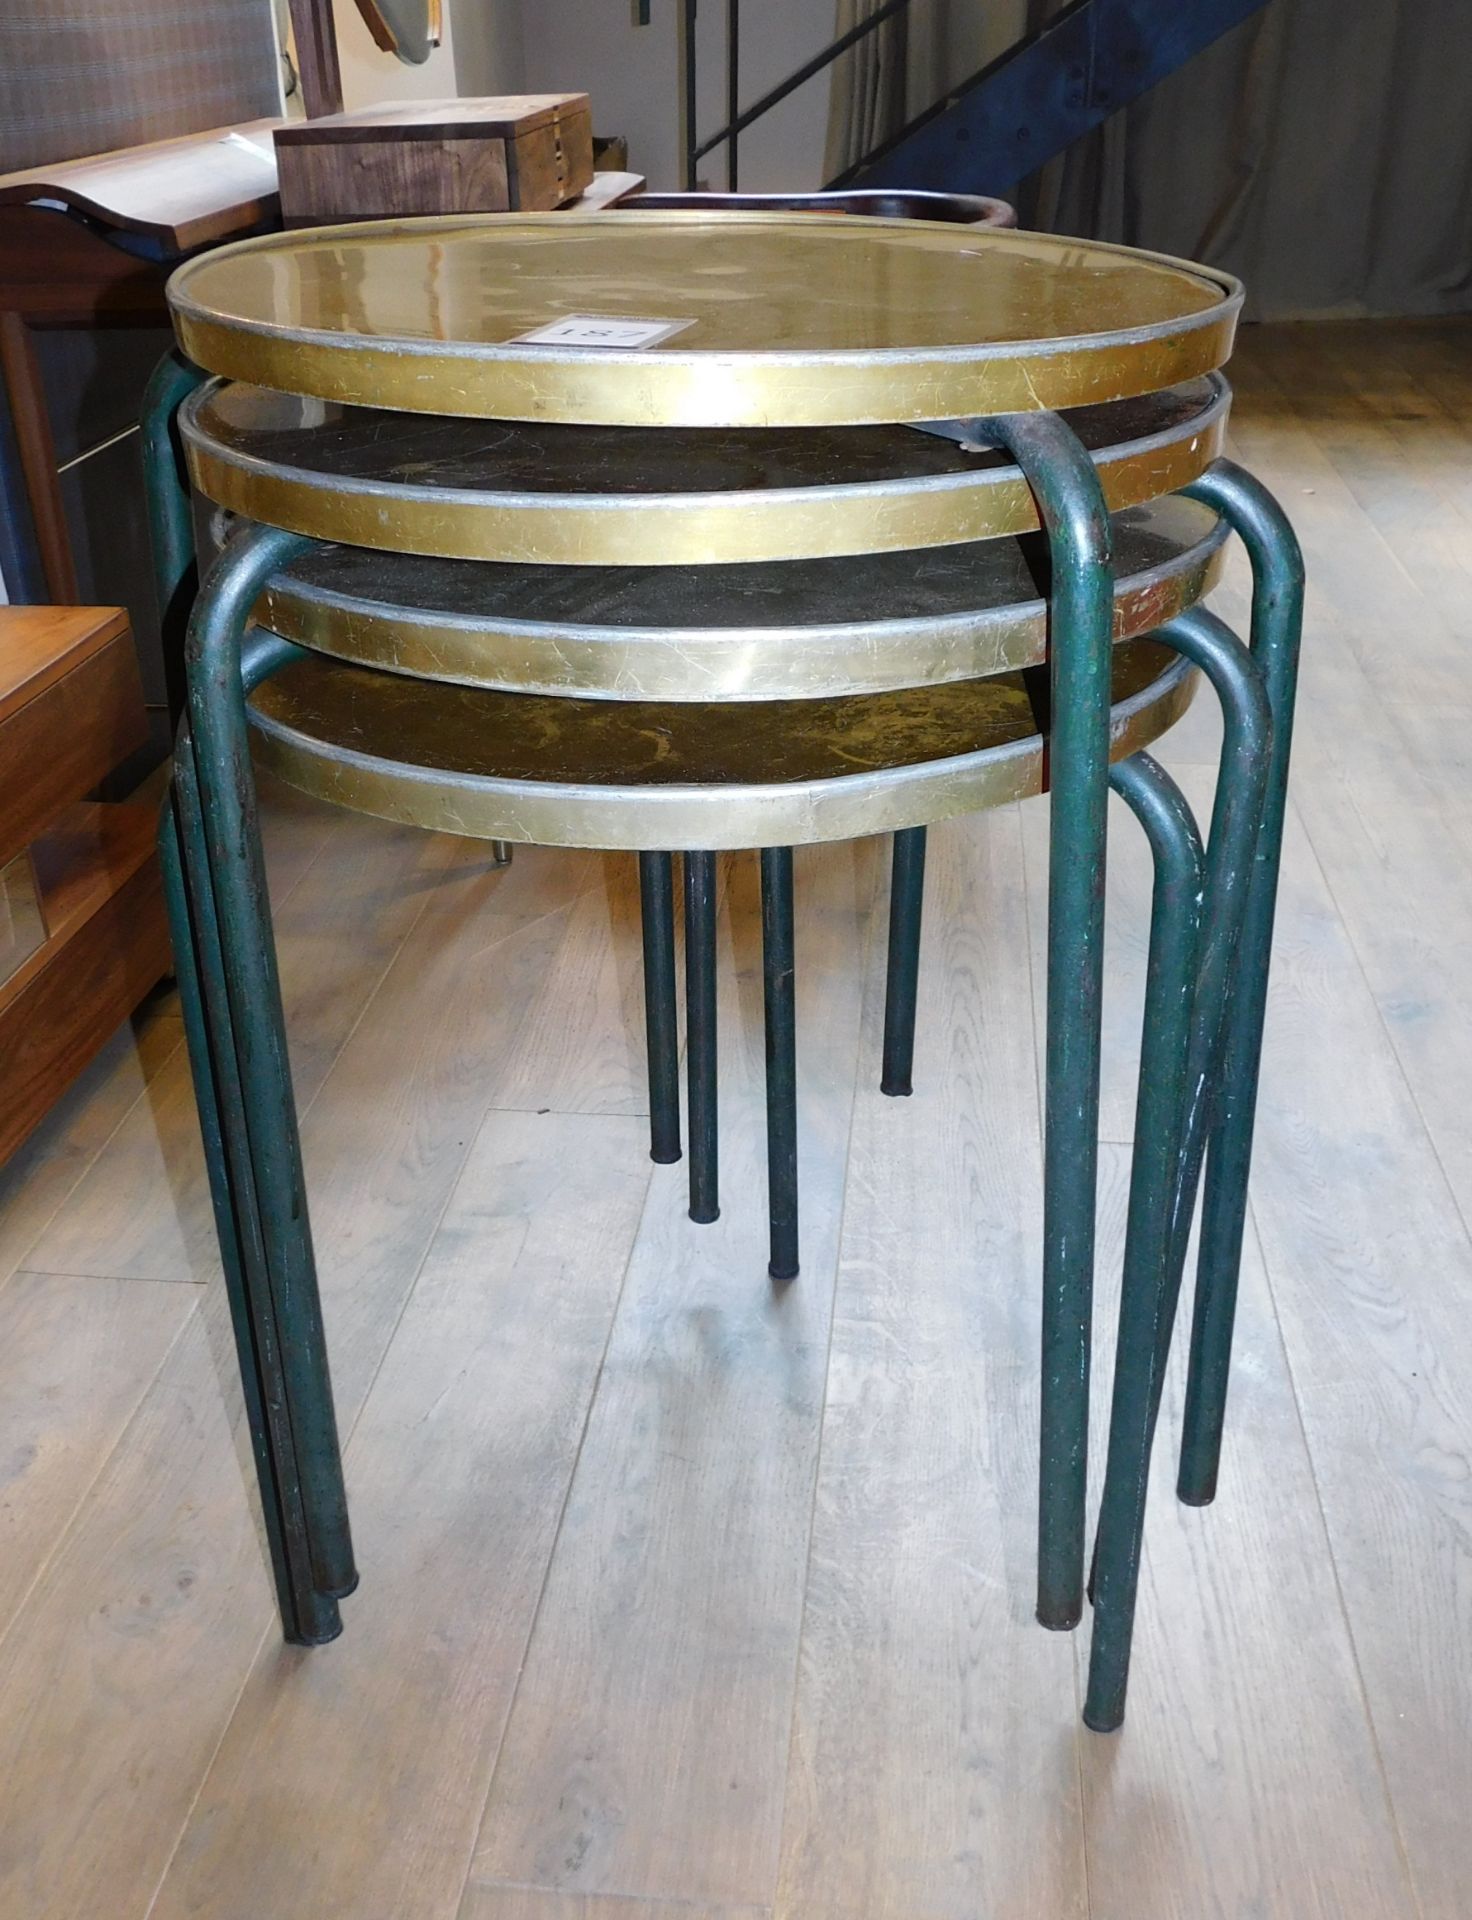 4 Circular Coffee Tables on Metal Supports (Located at 155 Farringdon Road, London, EC1R 3AF) - Image 2 of 2